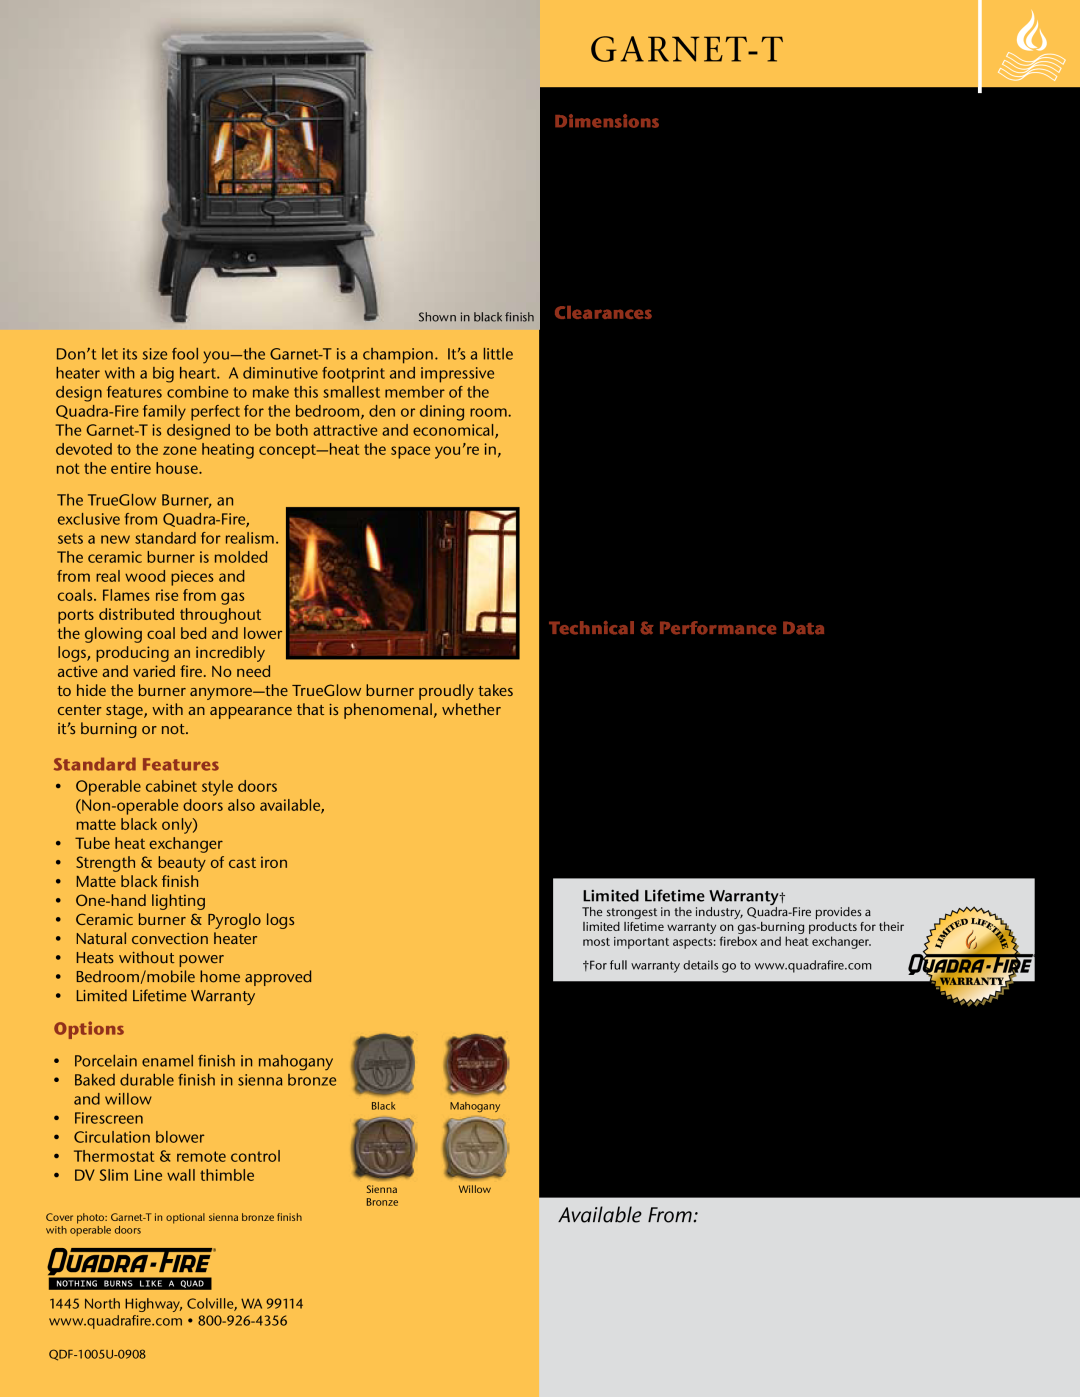 Hearth and Home Technologies Garnet-T Cast Iron manual Available From, Standard Features, Dimensions, Clearances, Options 